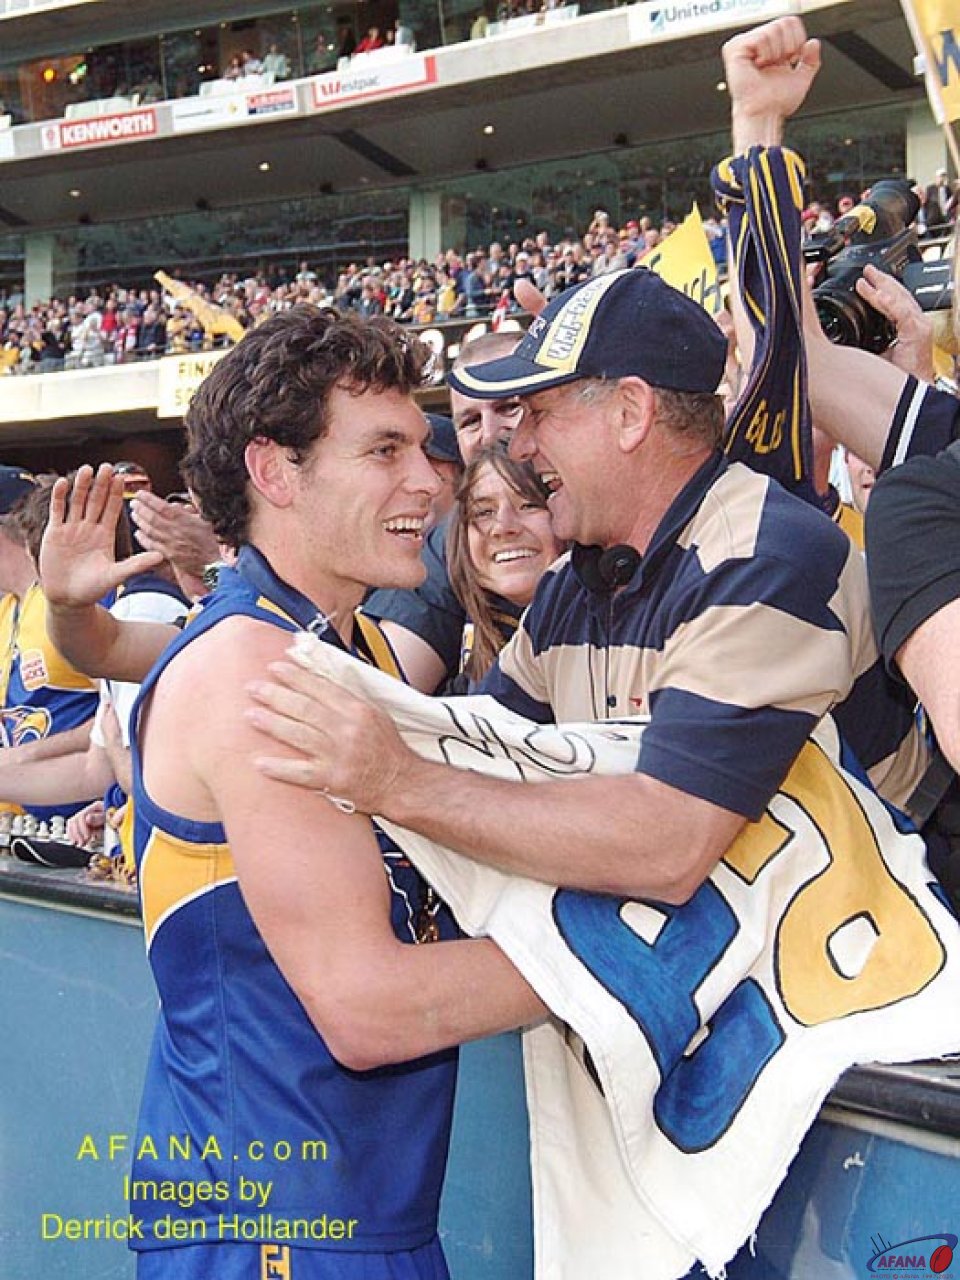 [b]A west Coast Eagles player is congratulated by family and friends on the teams victory lap[/b]